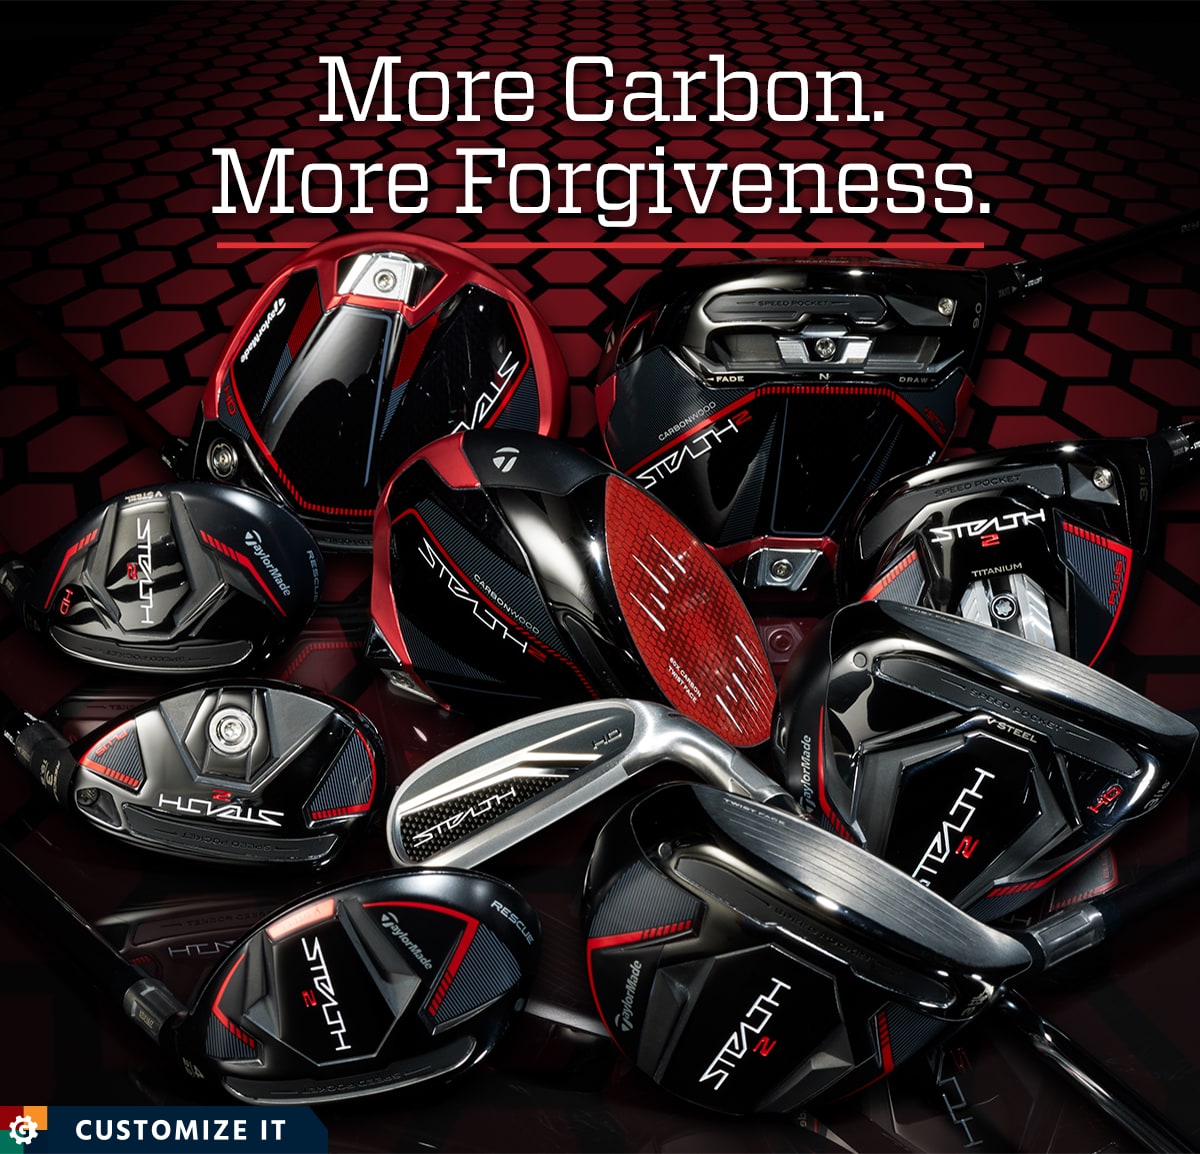 More carbon. More forgiveness. Customize it.